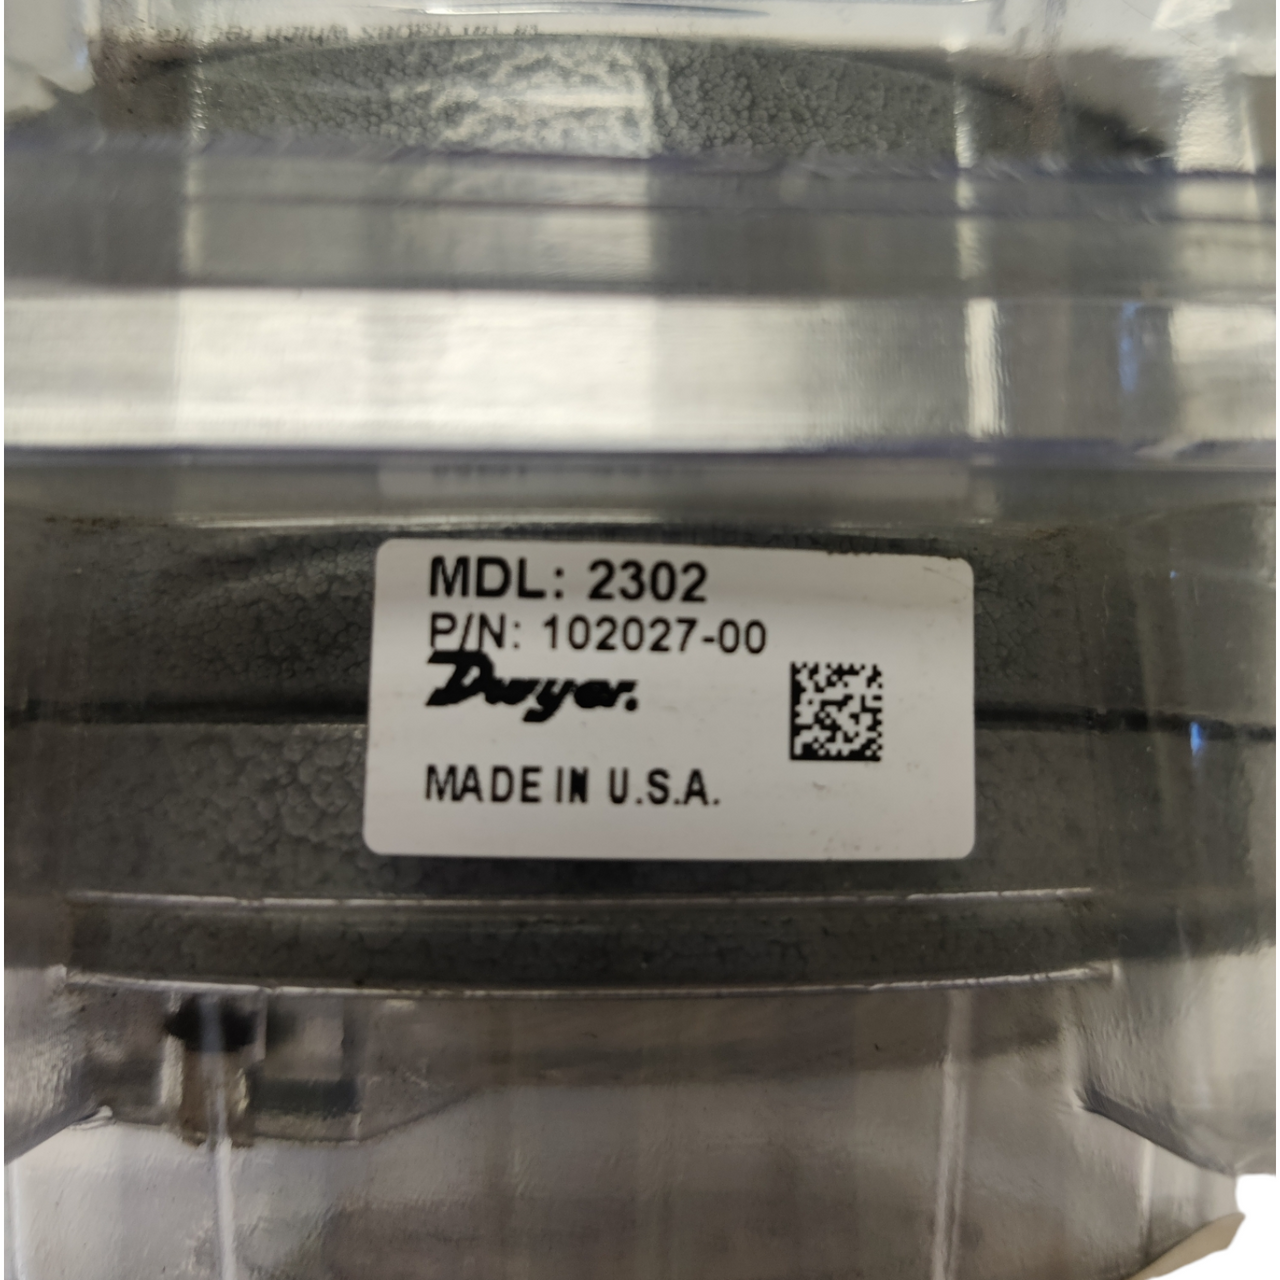 Dwyer 2302 Magnehelic Differential Pressure Gage - 102027-00